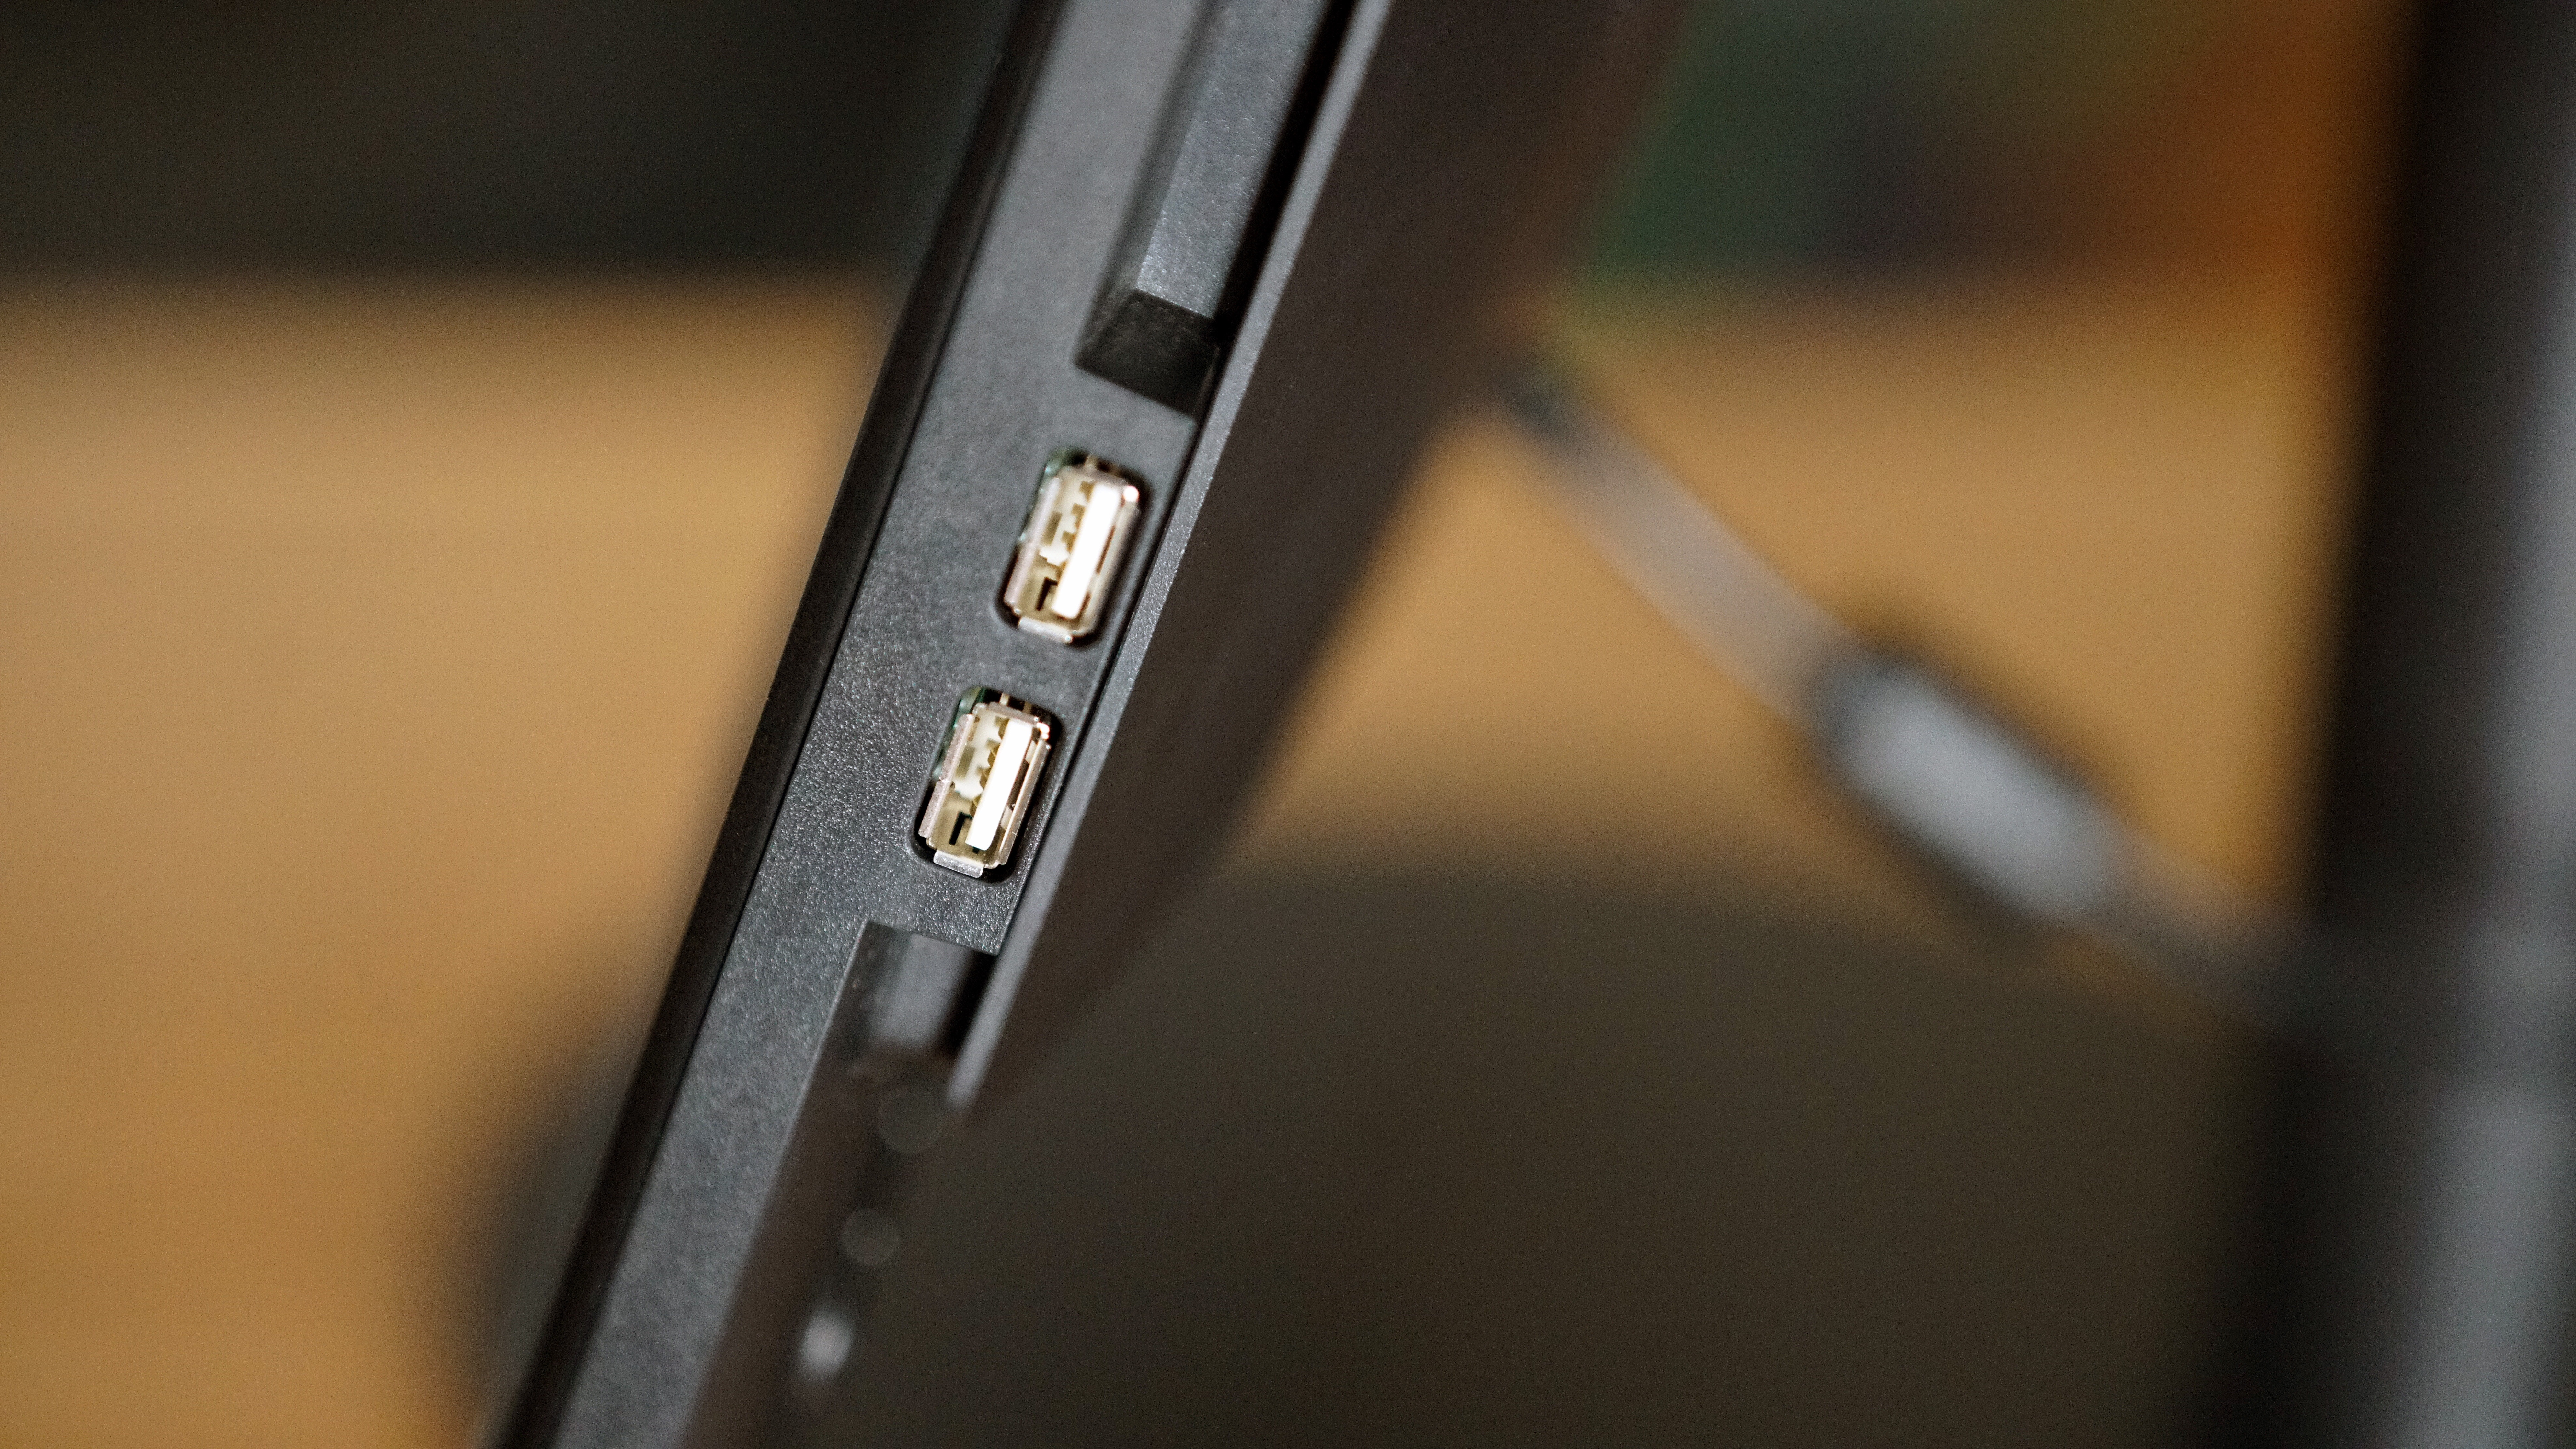 The side ports of the MSI Pro AP242